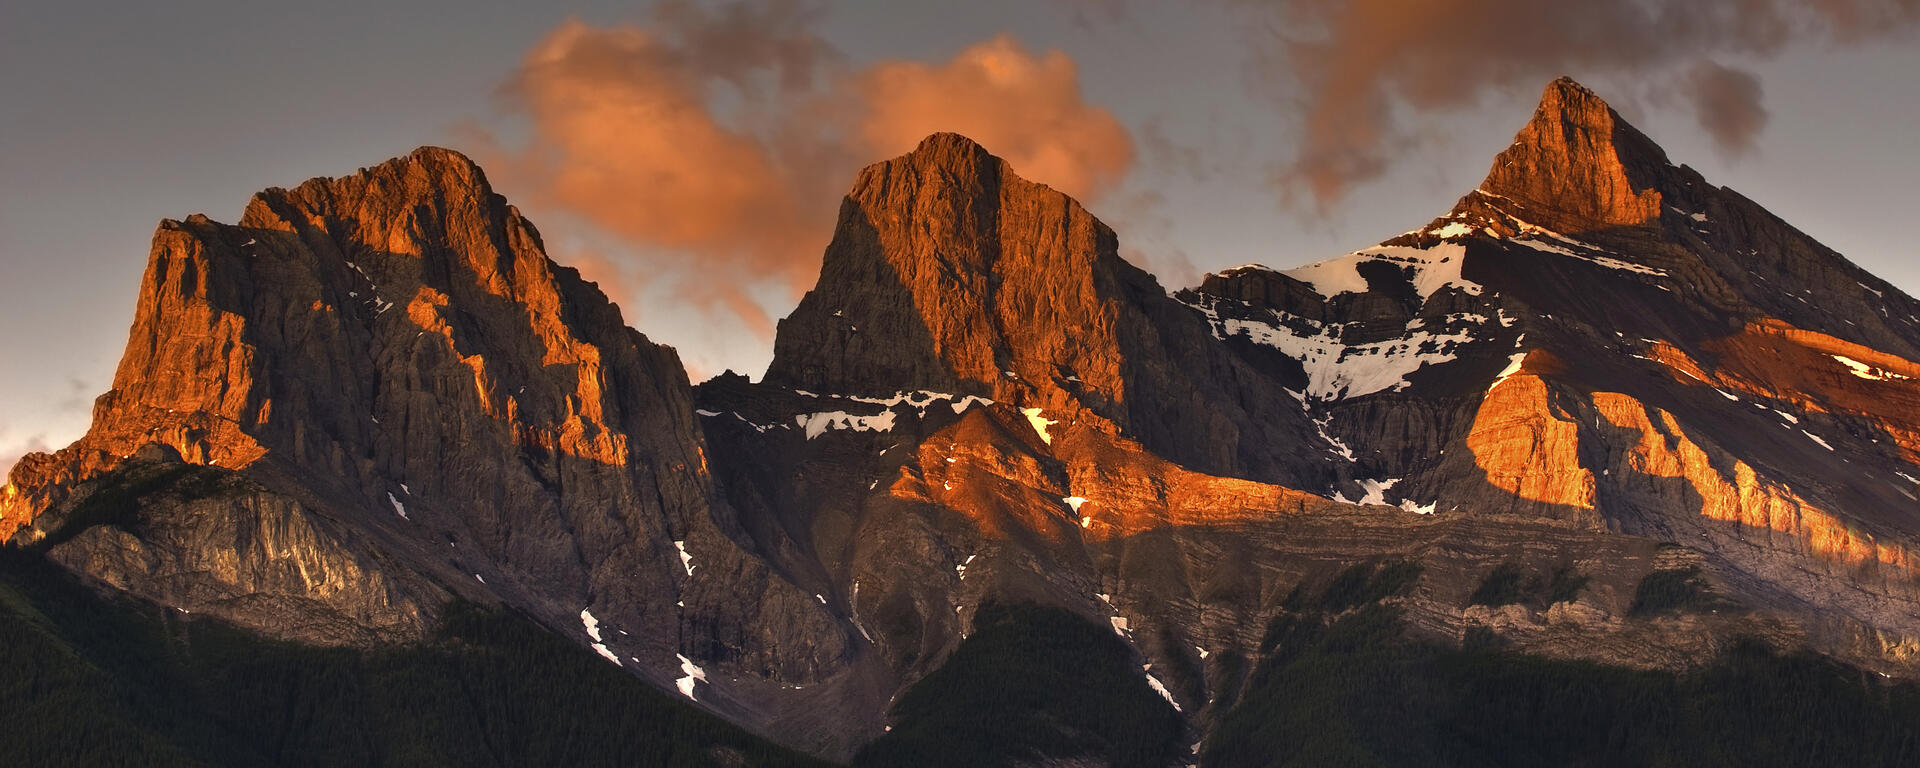 The Three Sisters mountains in Canmore Alberta Canada's Rocky Mountains as Sunrise